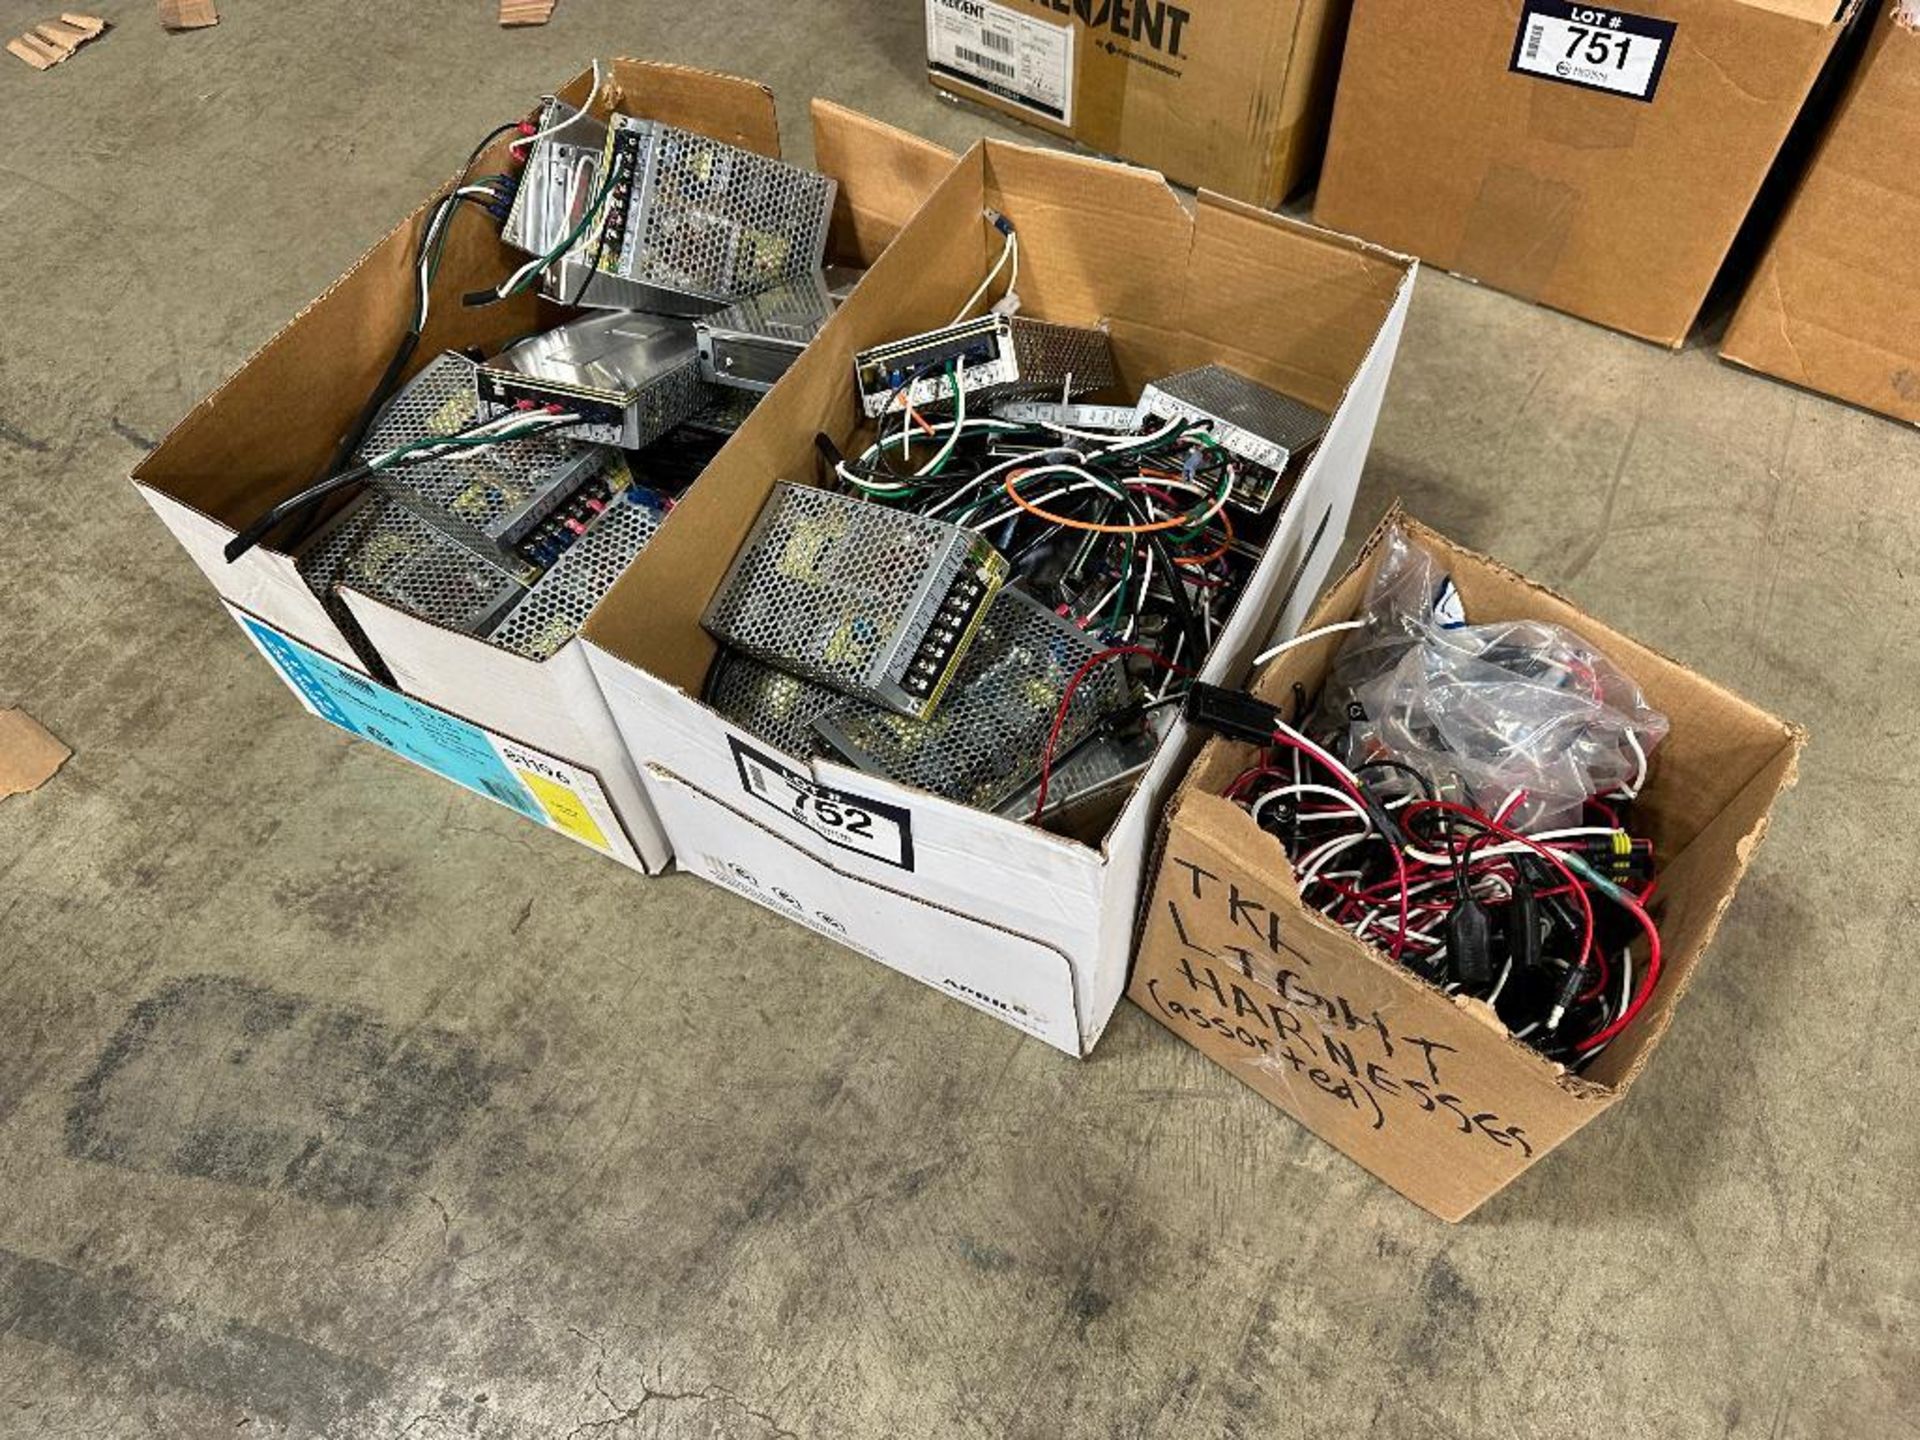 Lot of (2) Boxes of Asst. Mean Well Power Supplies and (1) Box of Asst. Wiring